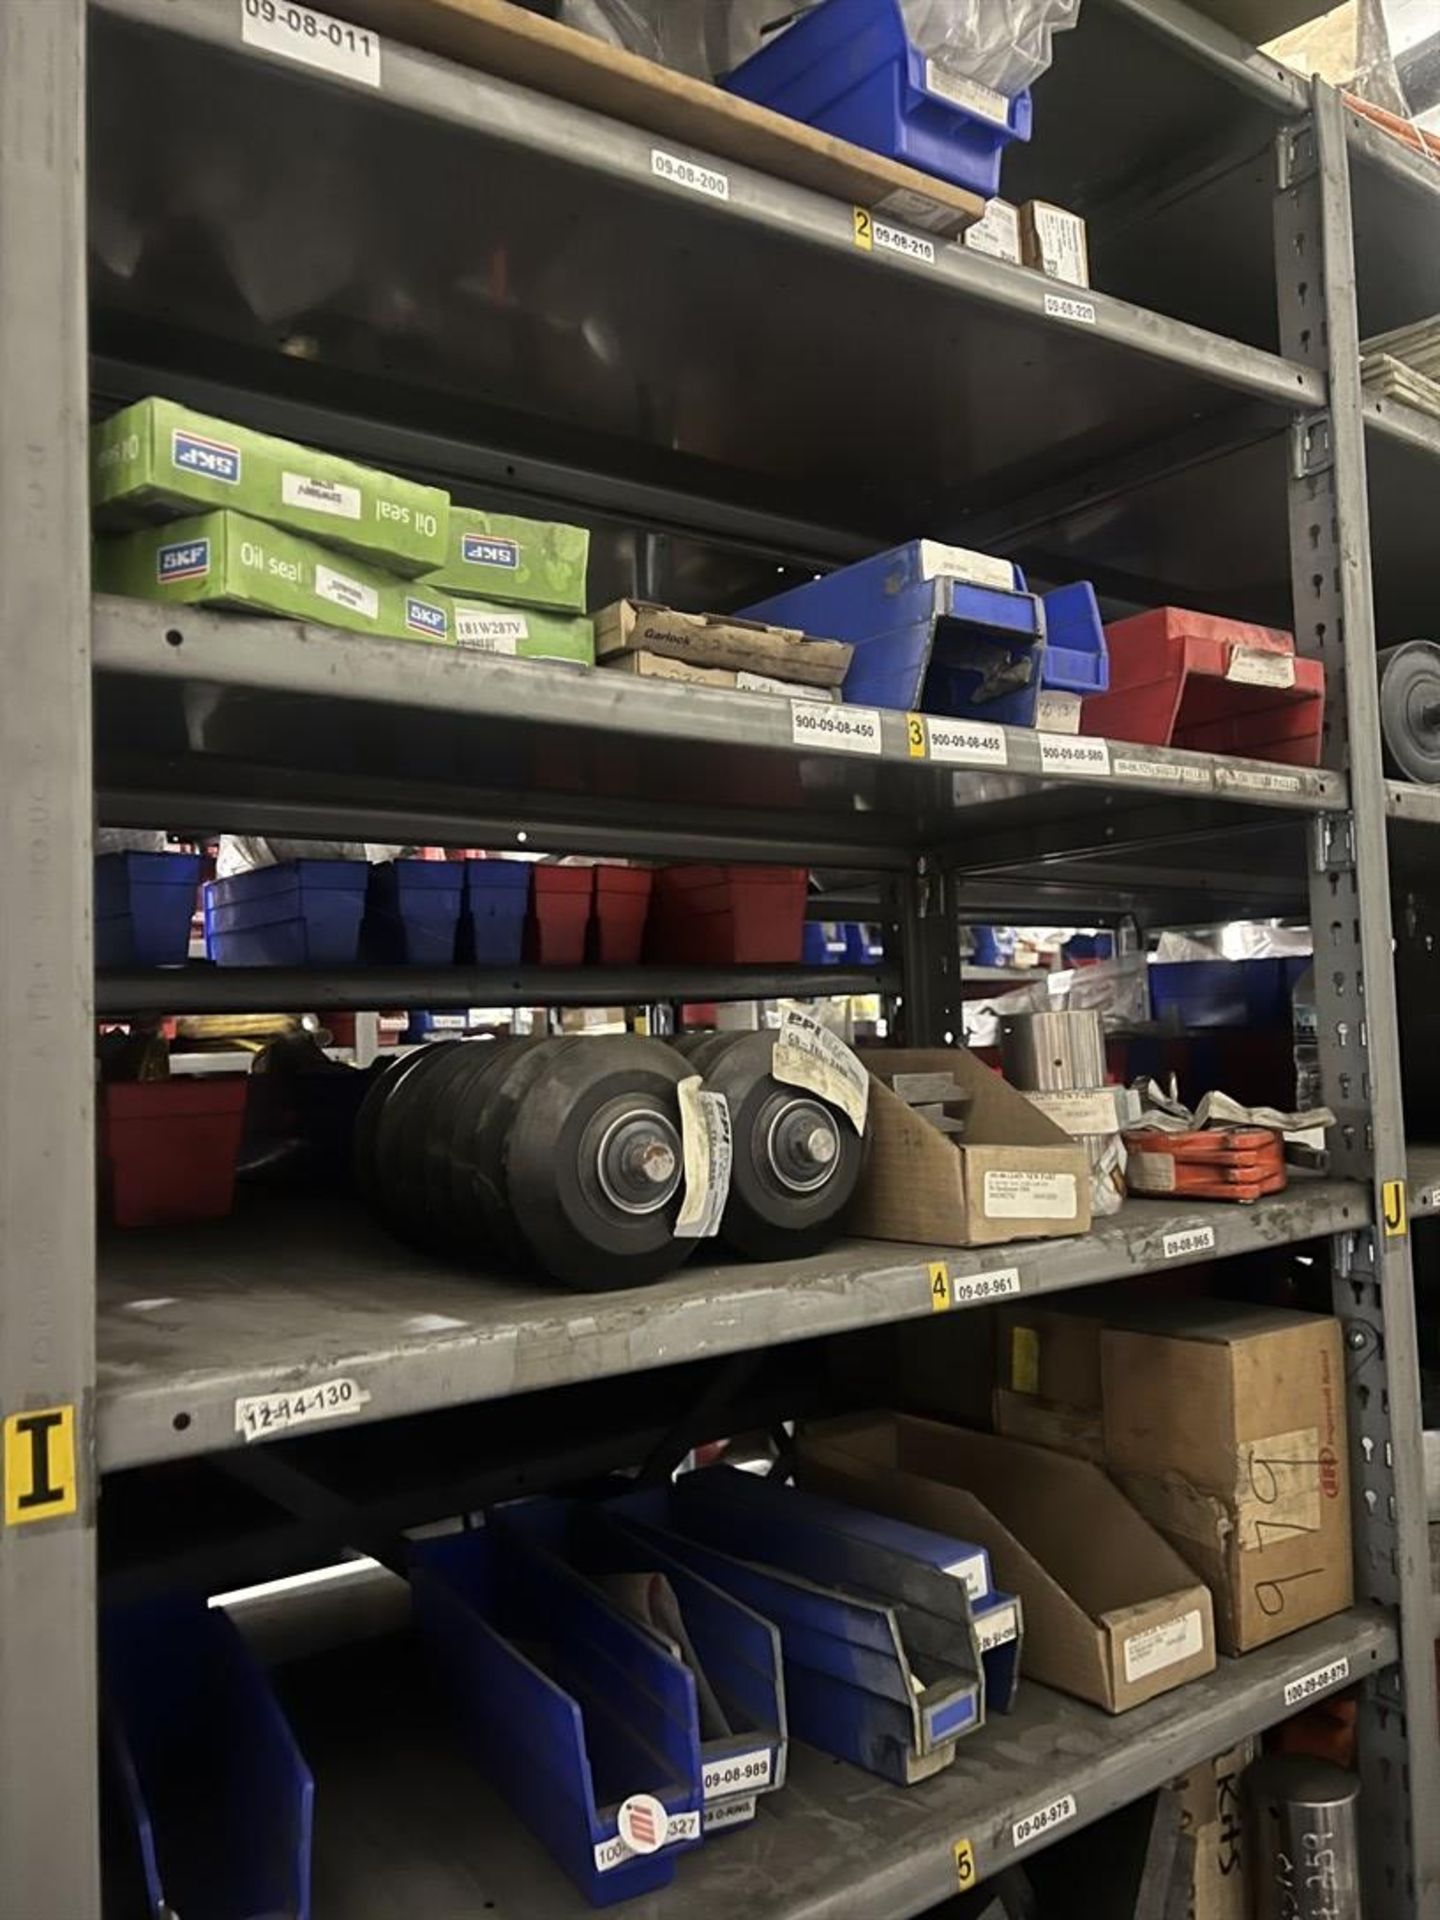 Lot Comprising (12) Shop Shelving Units w/ Contents Including Wheelabrator and Conveyor Components - Image 6 of 9